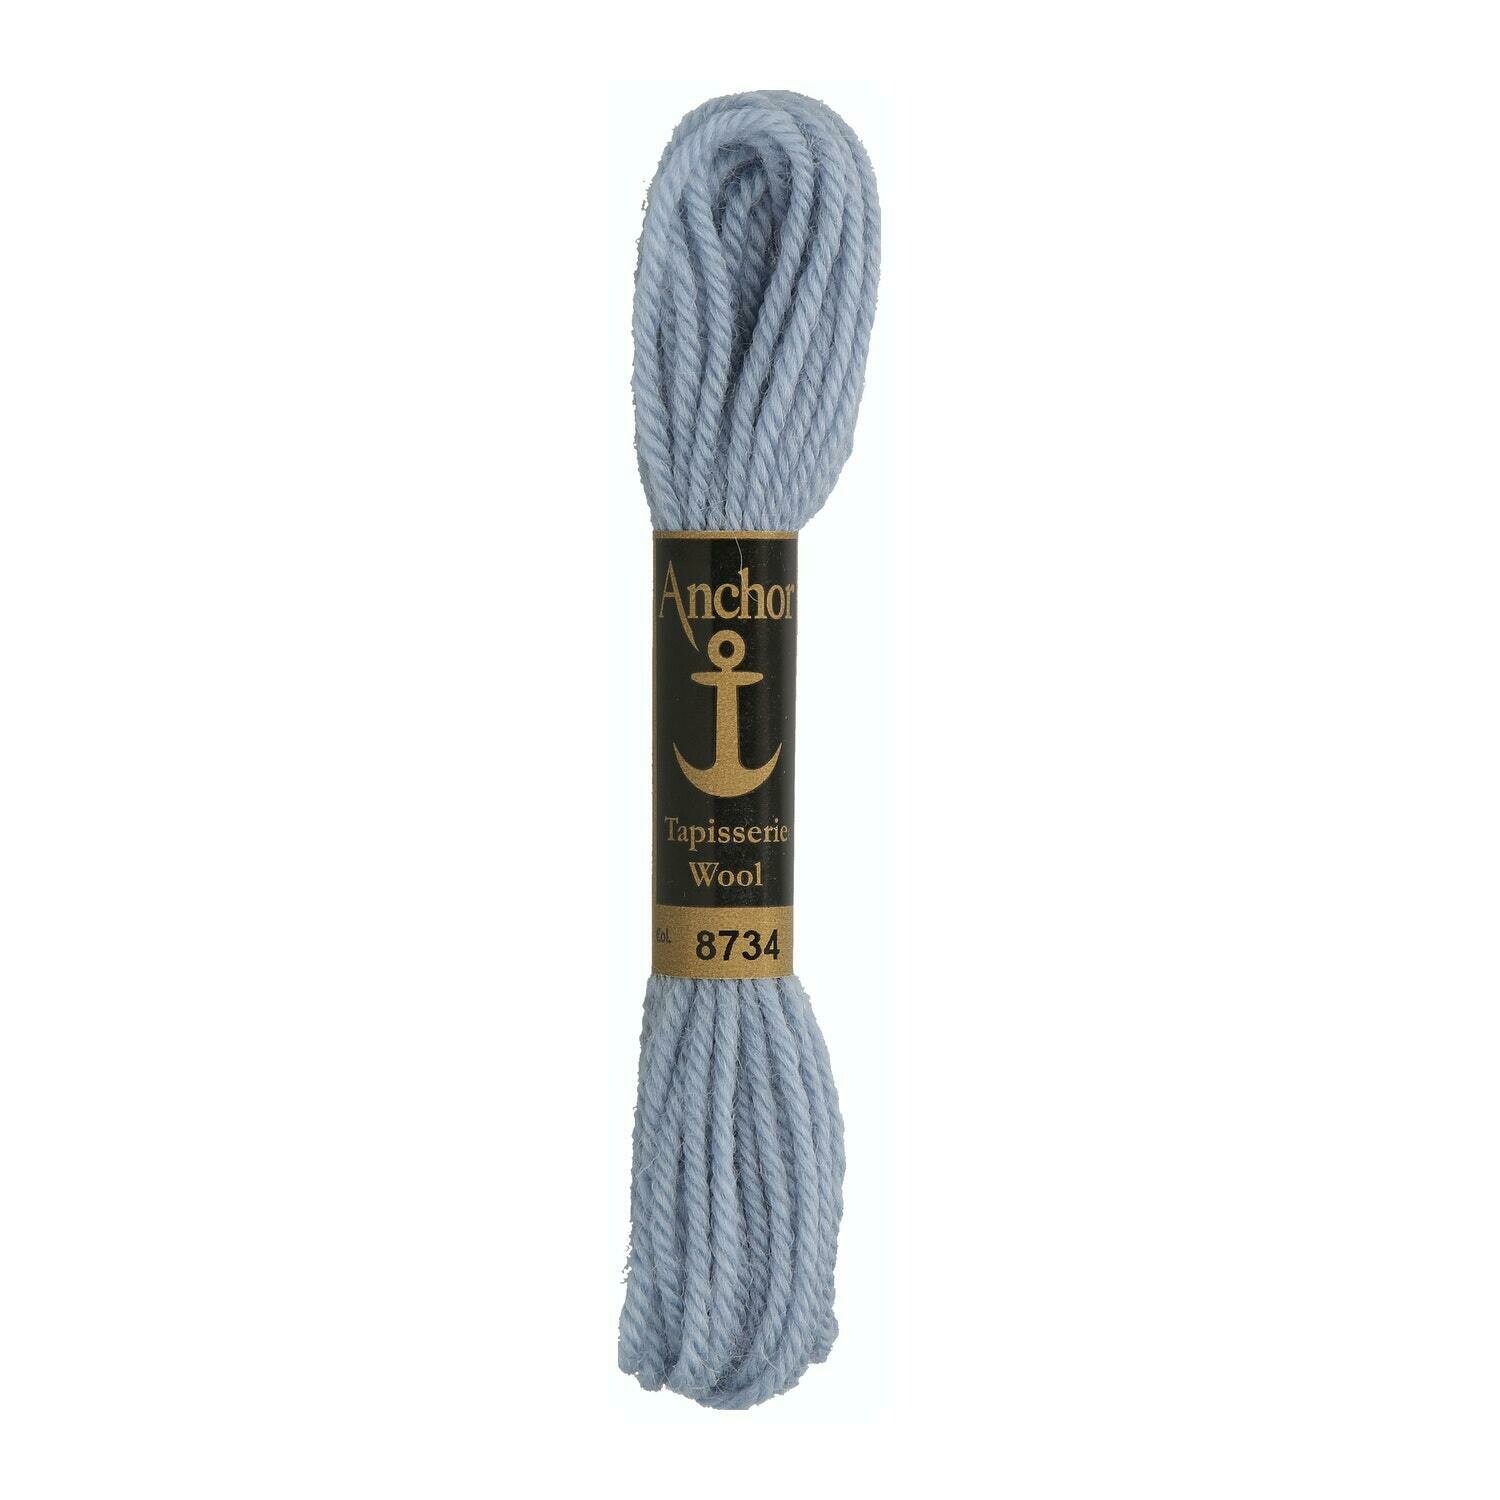 Anchor Tapisserie Wool #08734